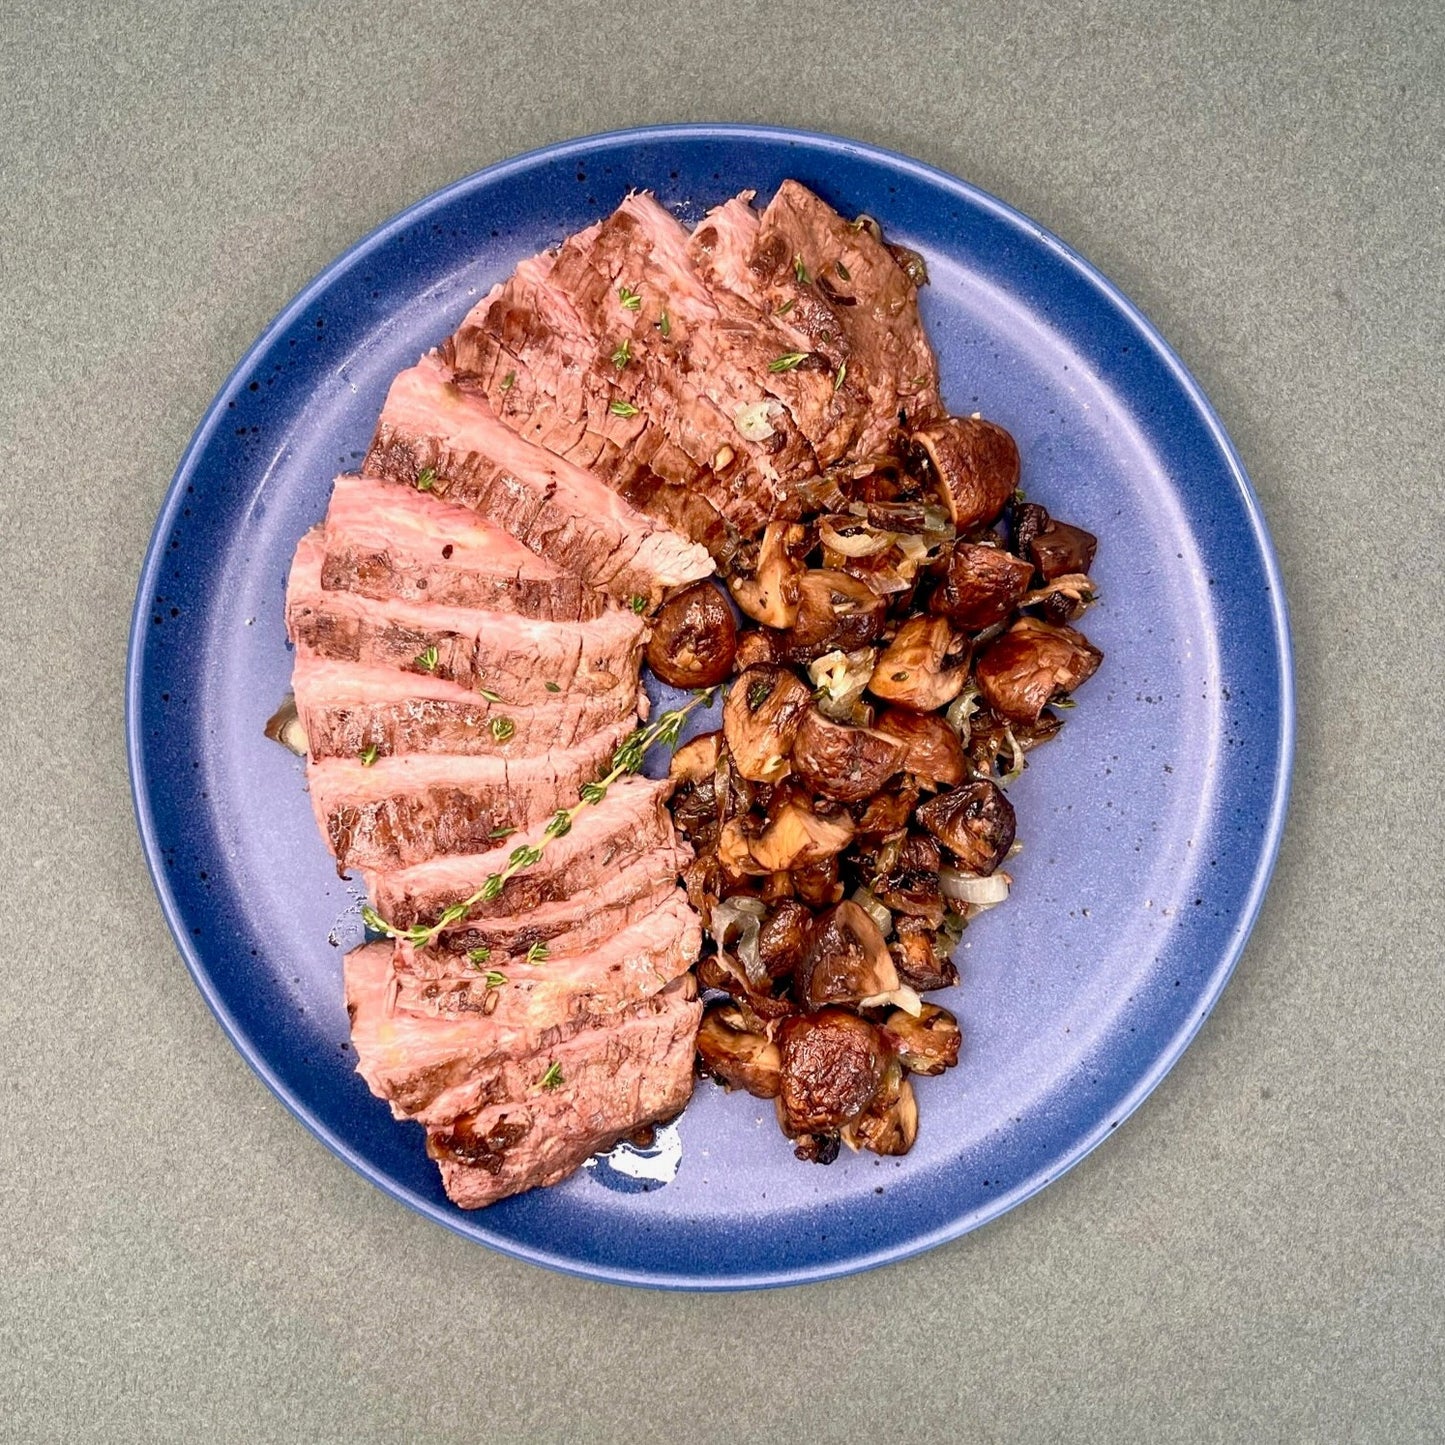 Grilled Flank Steak with Shallot Mushrooms & Thyme